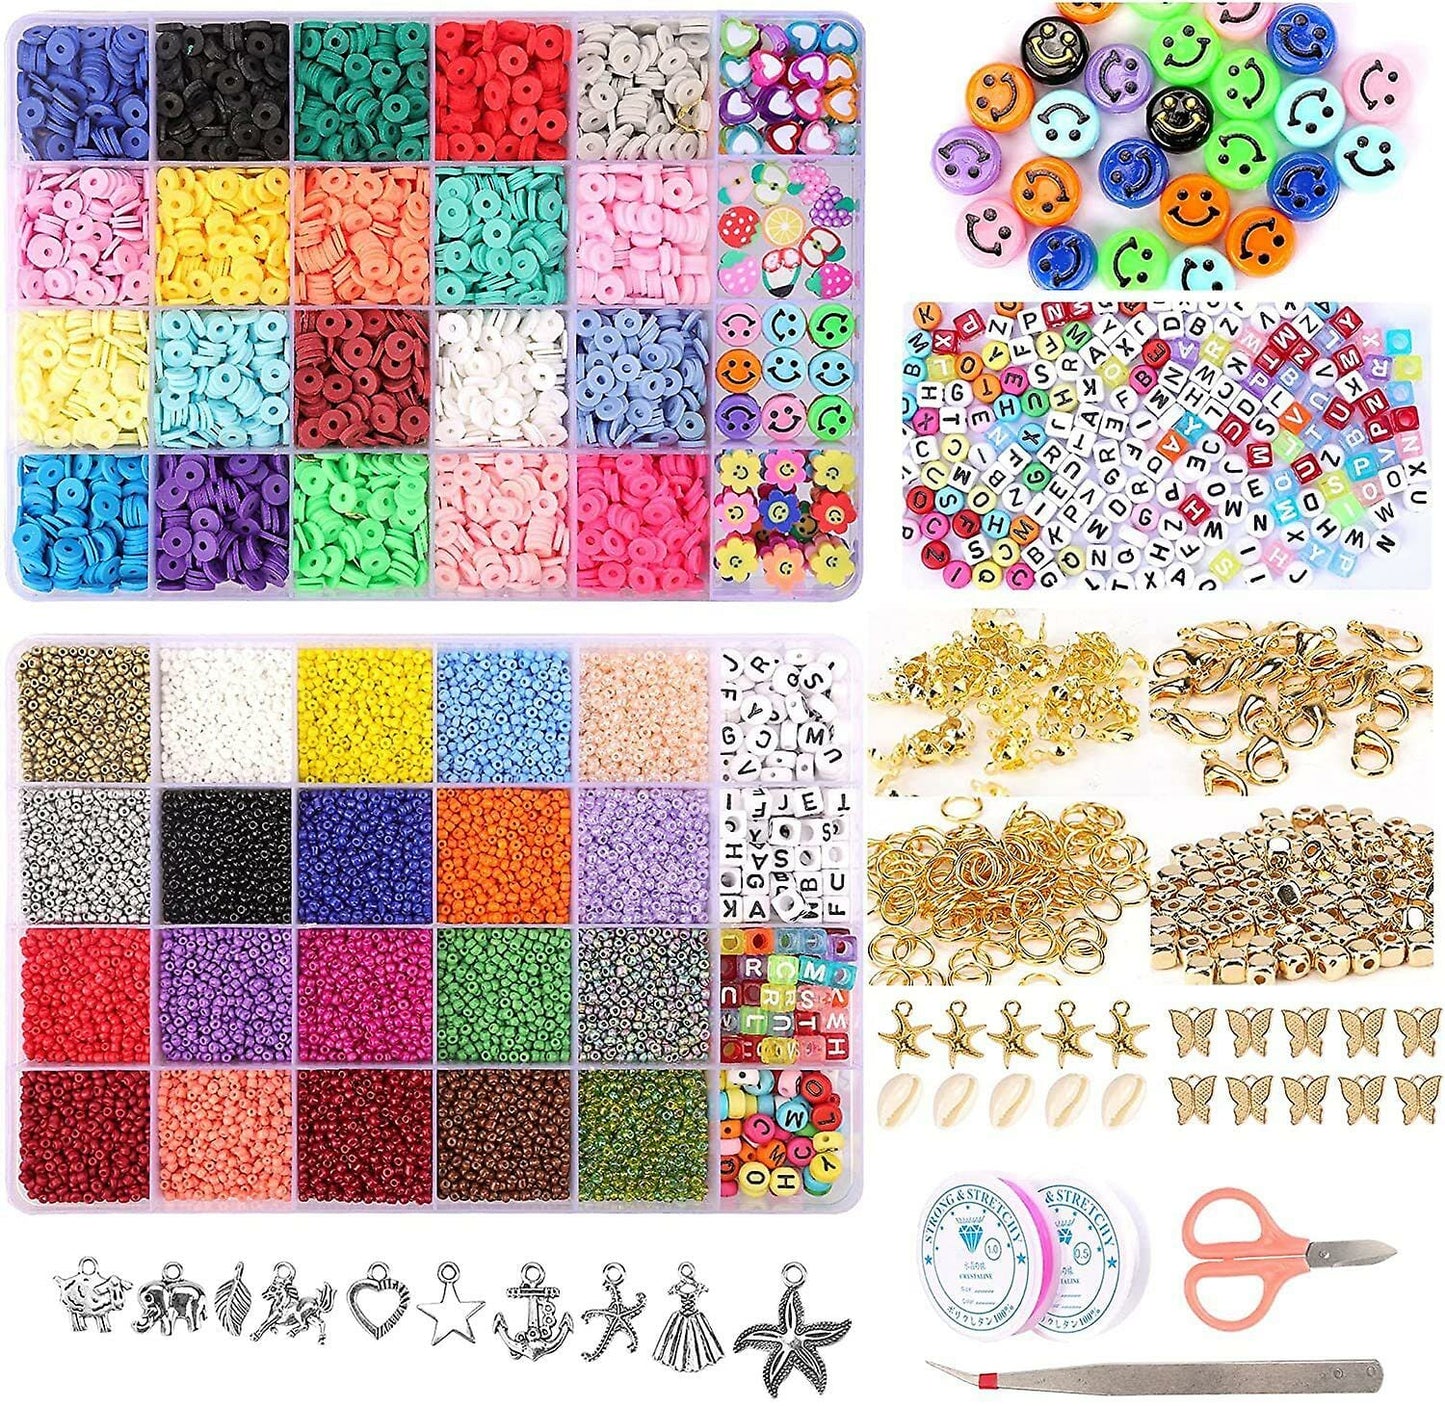 25000 Pcs 24 Girds DIY Acrylic Bead A-Z Letter Beads and Polymer Soft Clay Kit For Bracelet Making